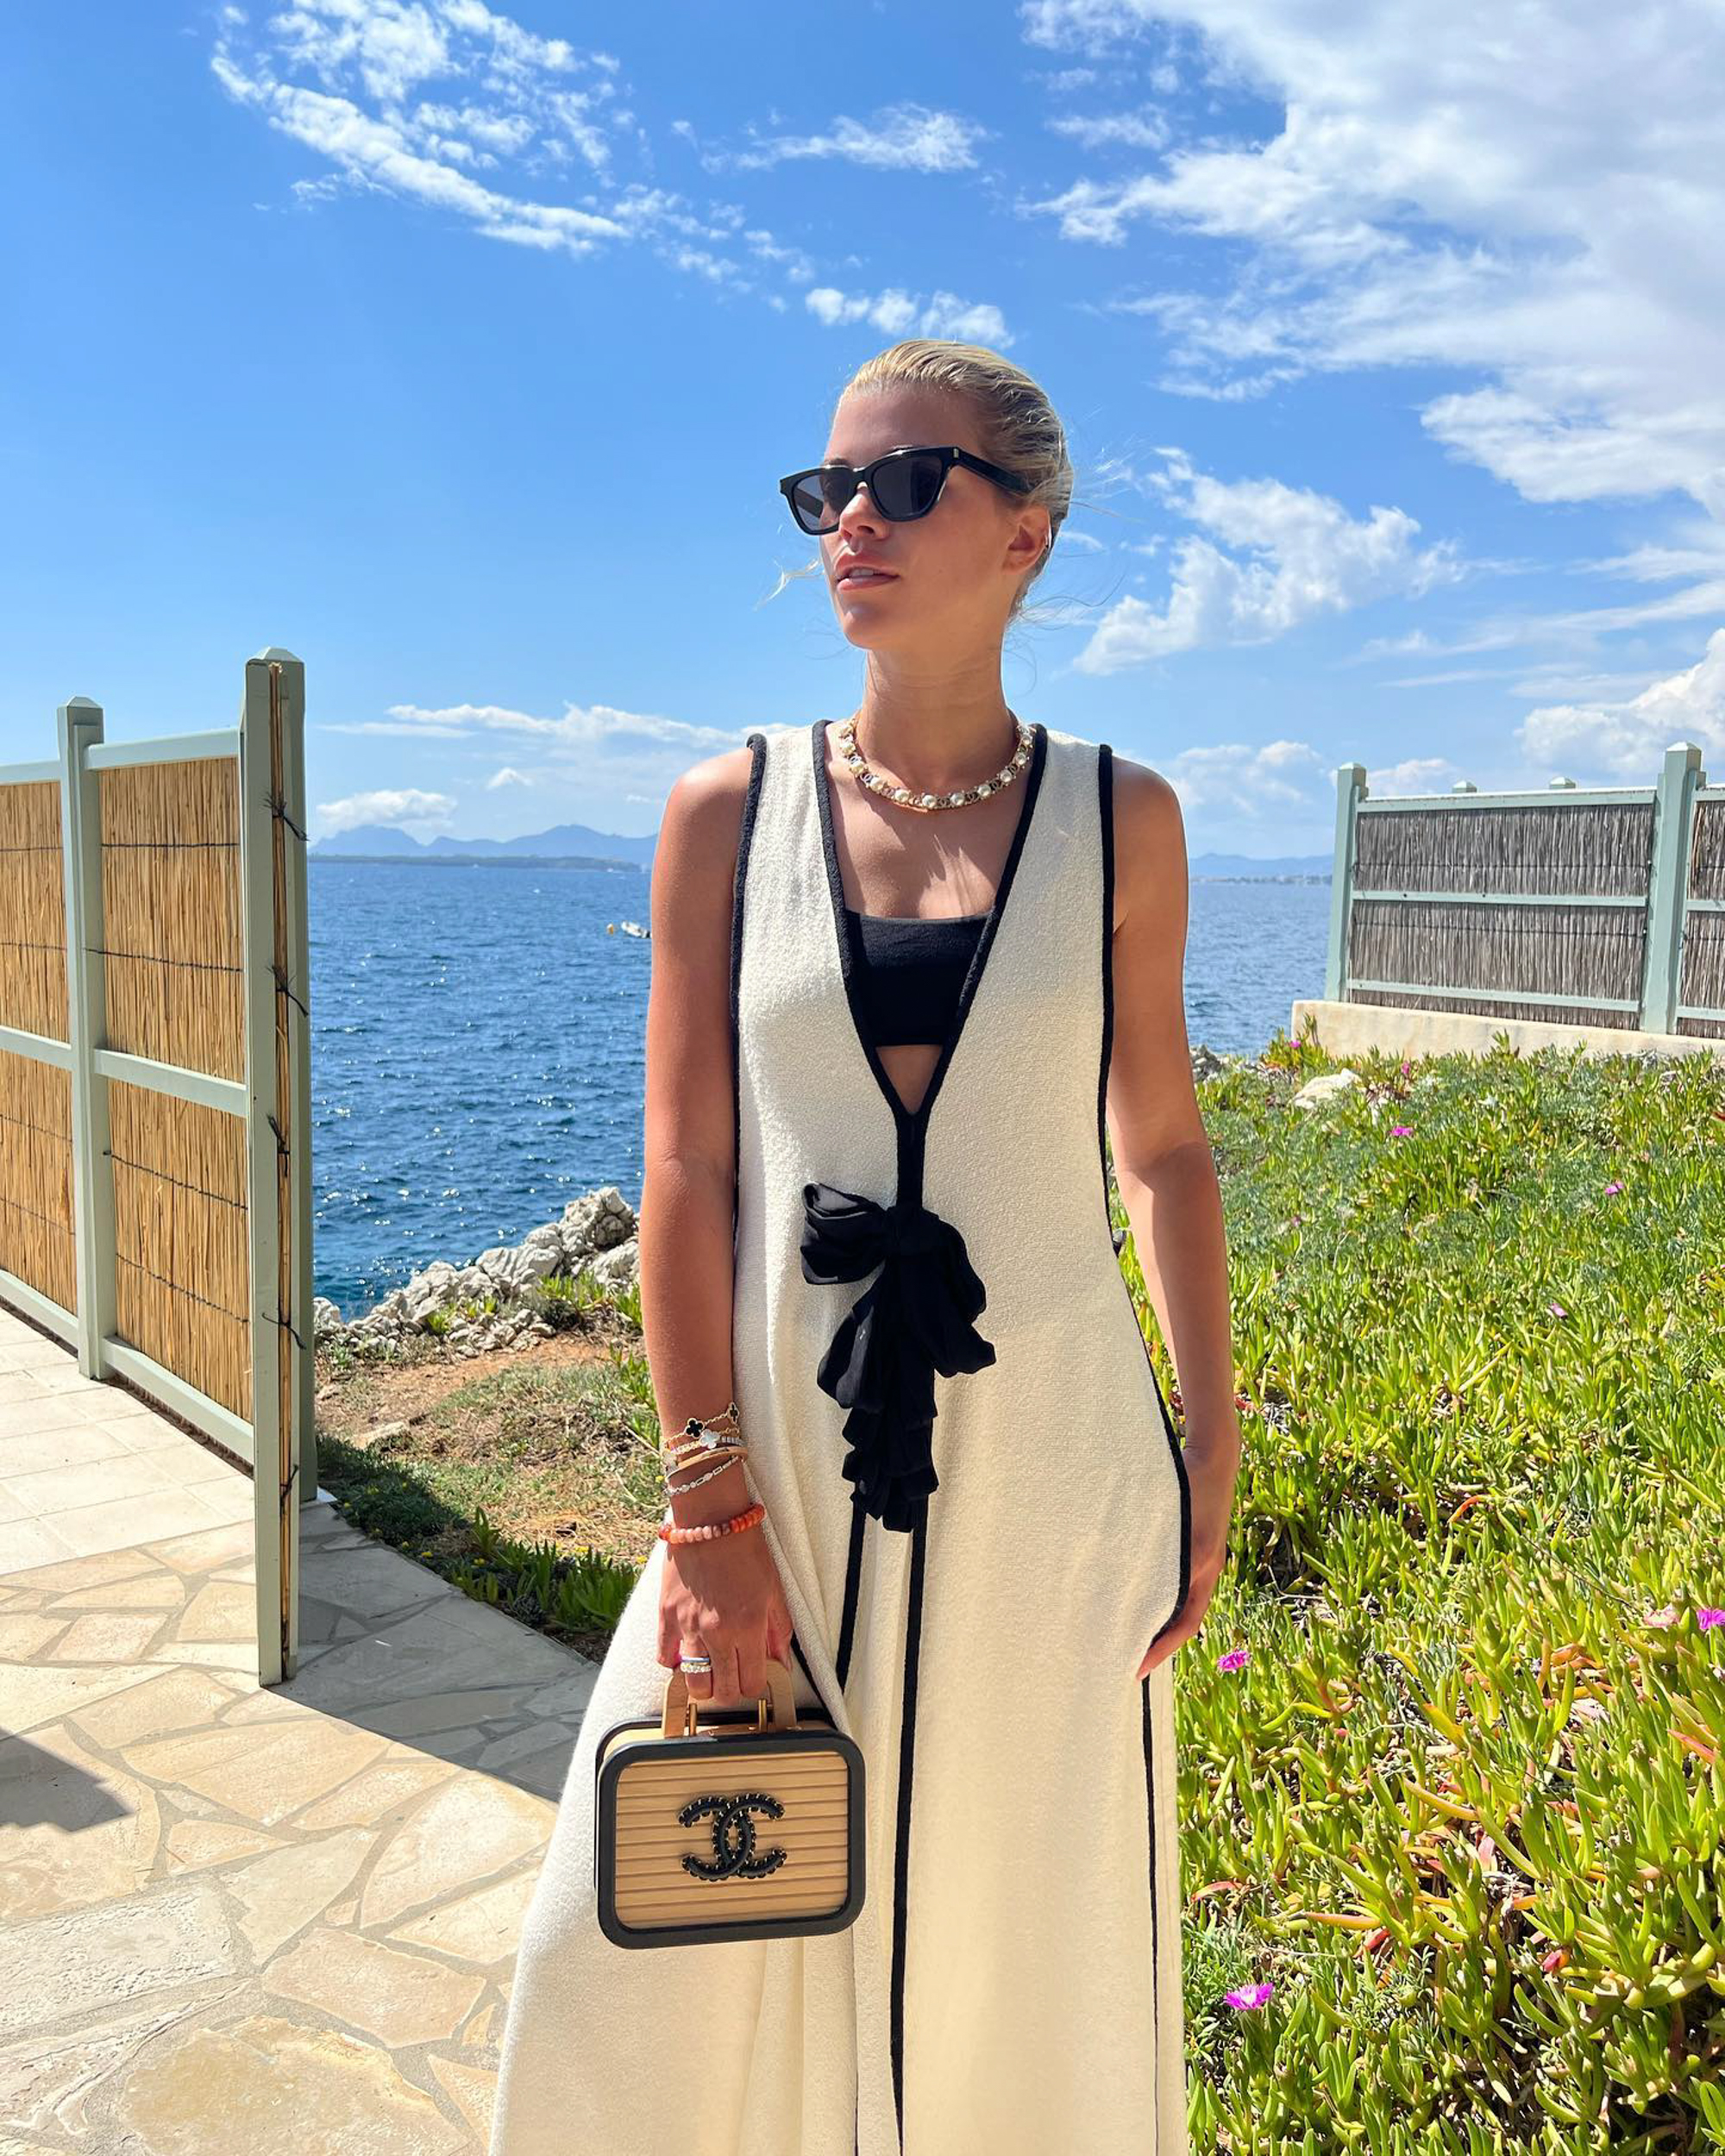 Sofia Richie in a white dress carrying a Chanel bag